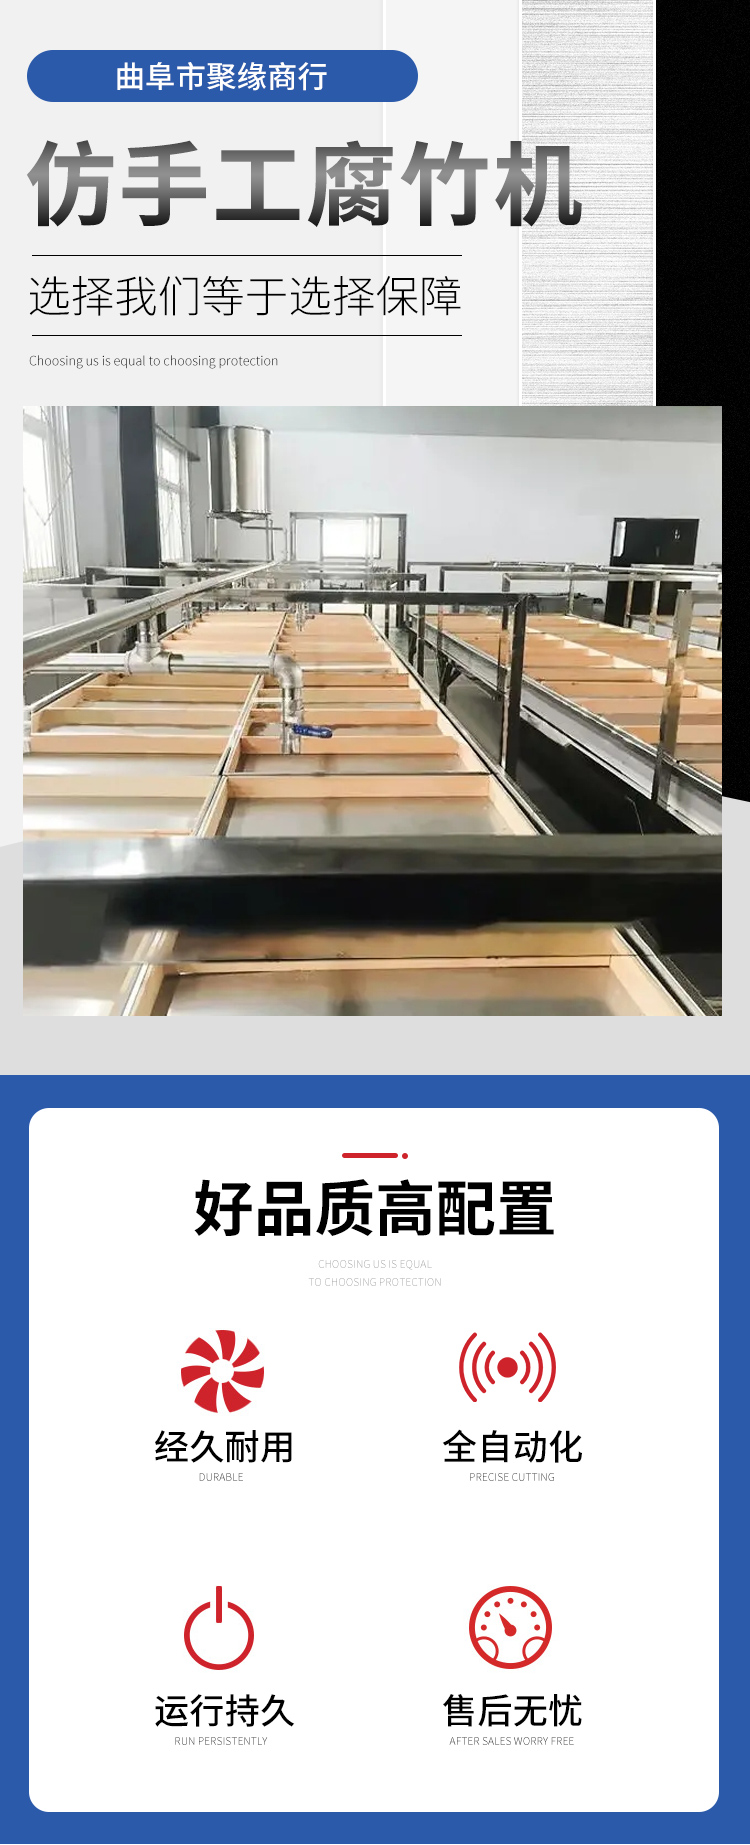 Manual extraction Rolls of dried bean milk creams machine equipment Small oil equipment Production line Thickness adjustable belt drying equipment